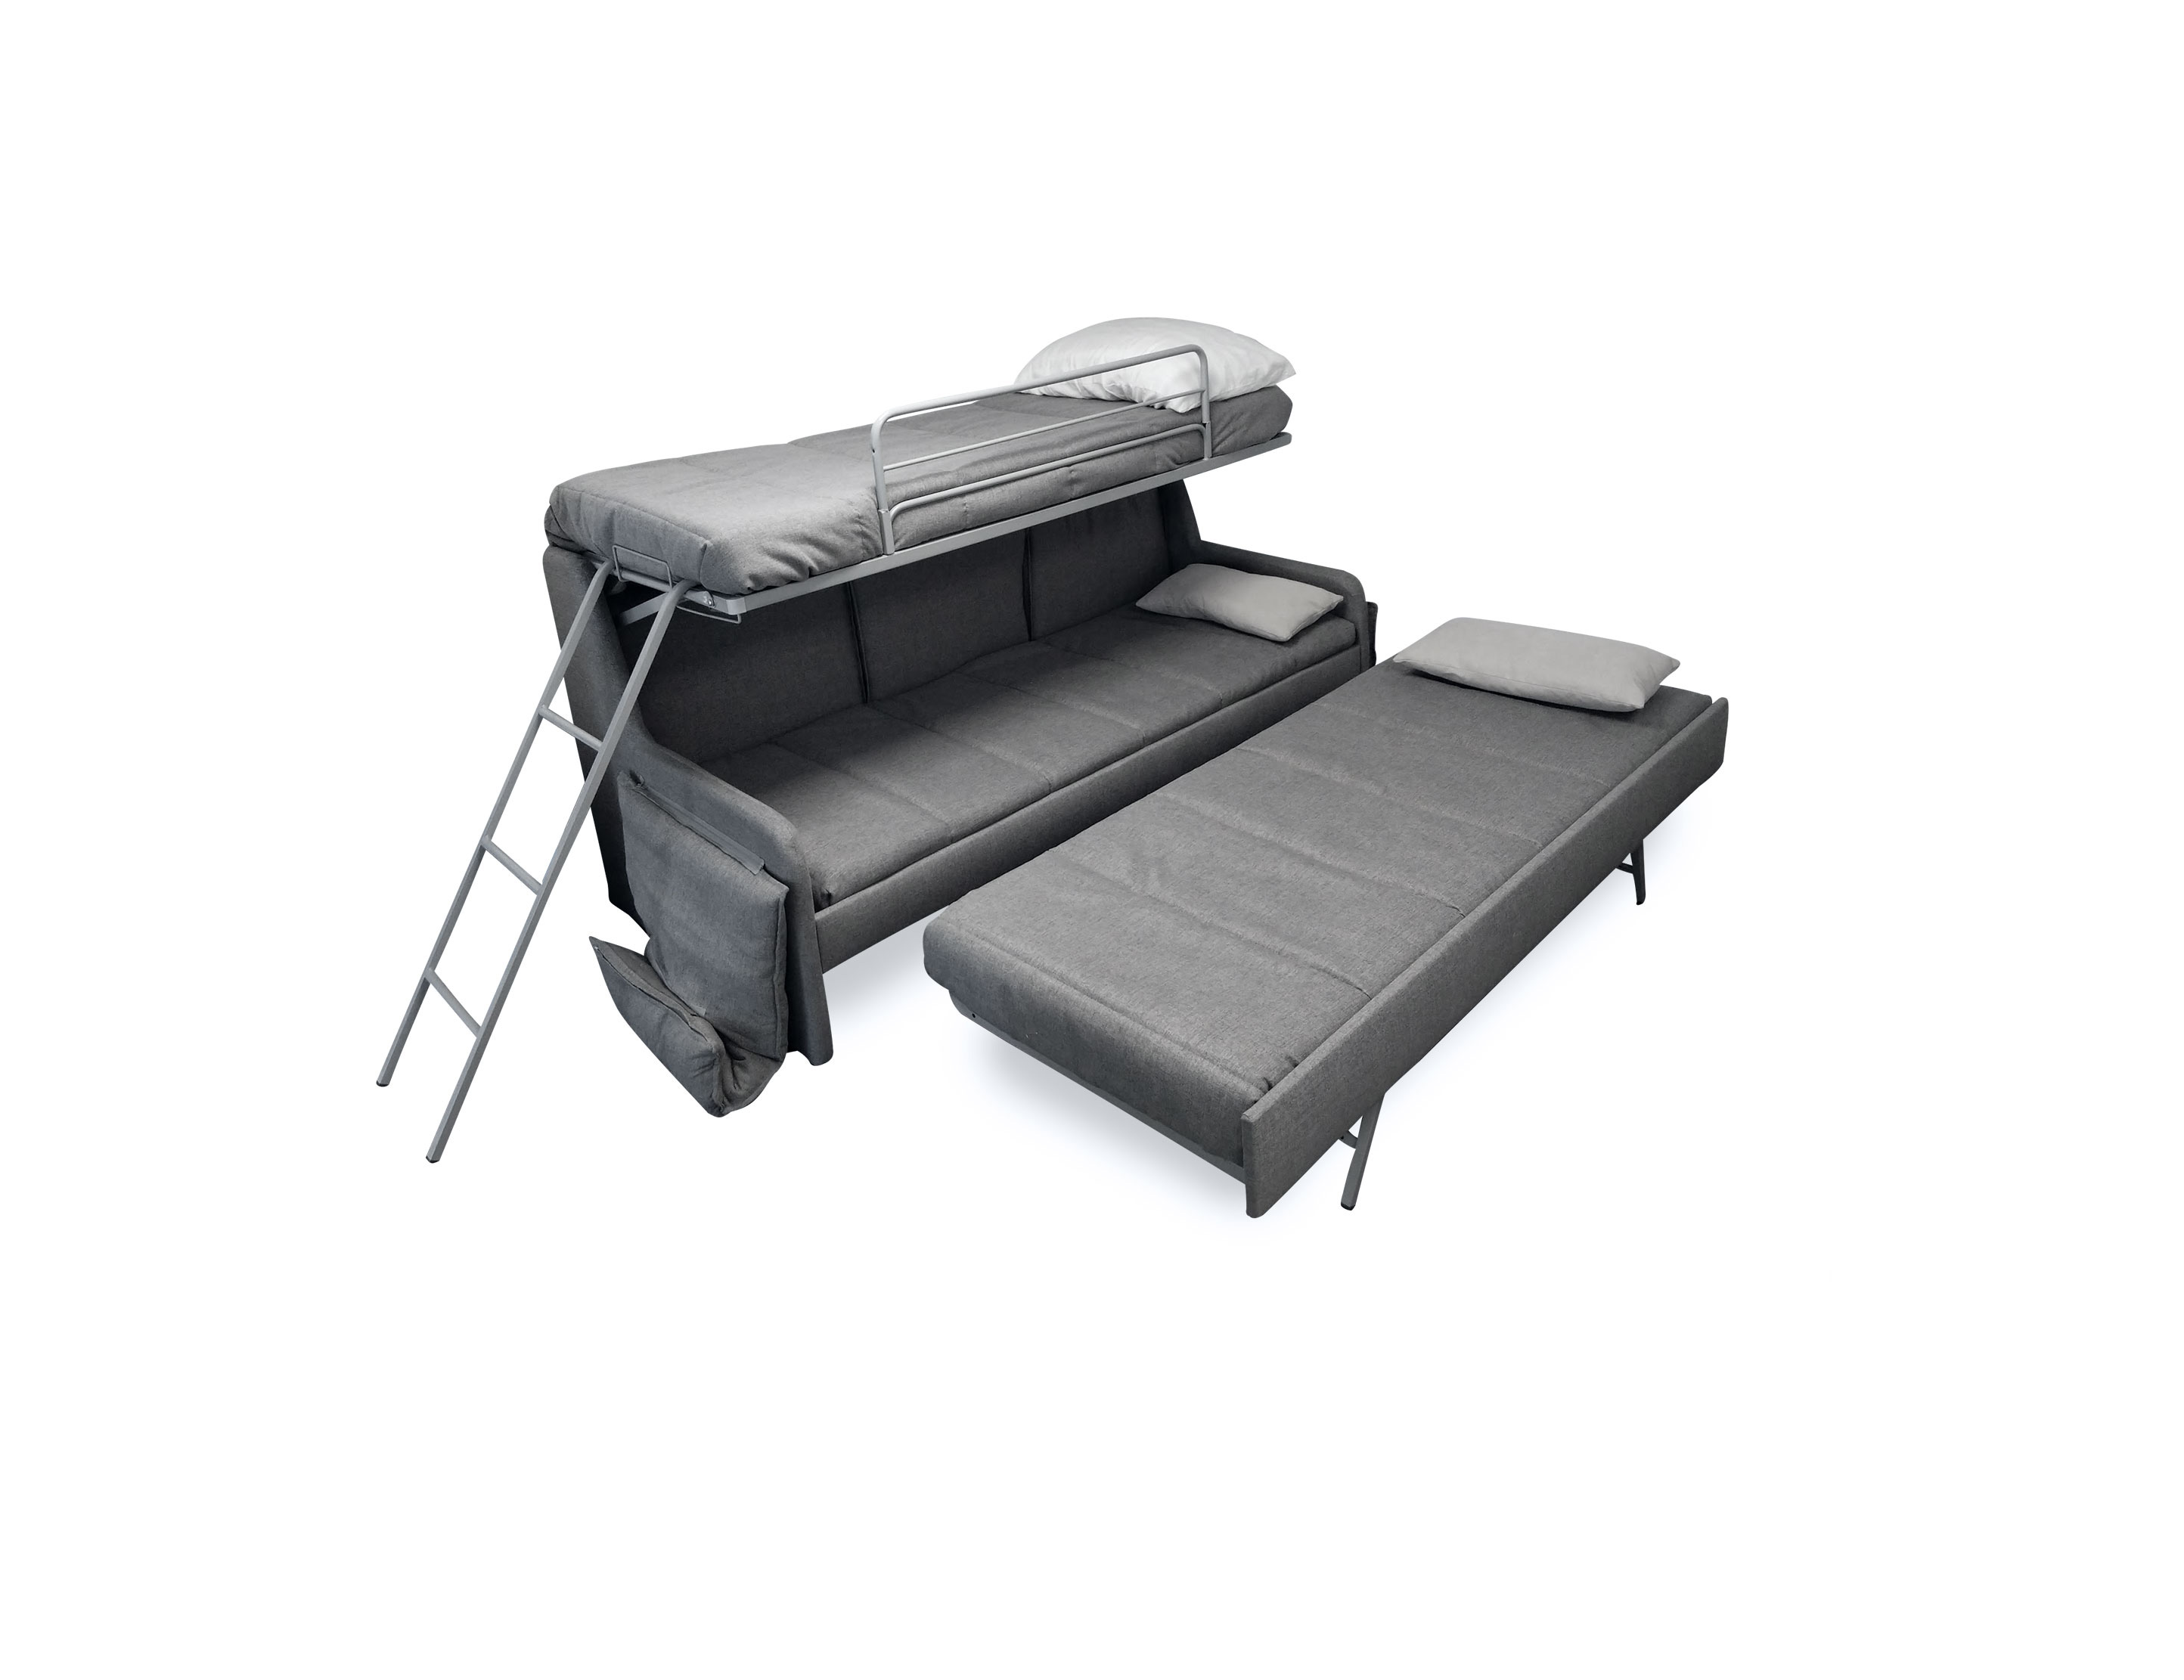 Transforming Sofa Bunk Bed Expand, Twin Beds That Convert To Bunk